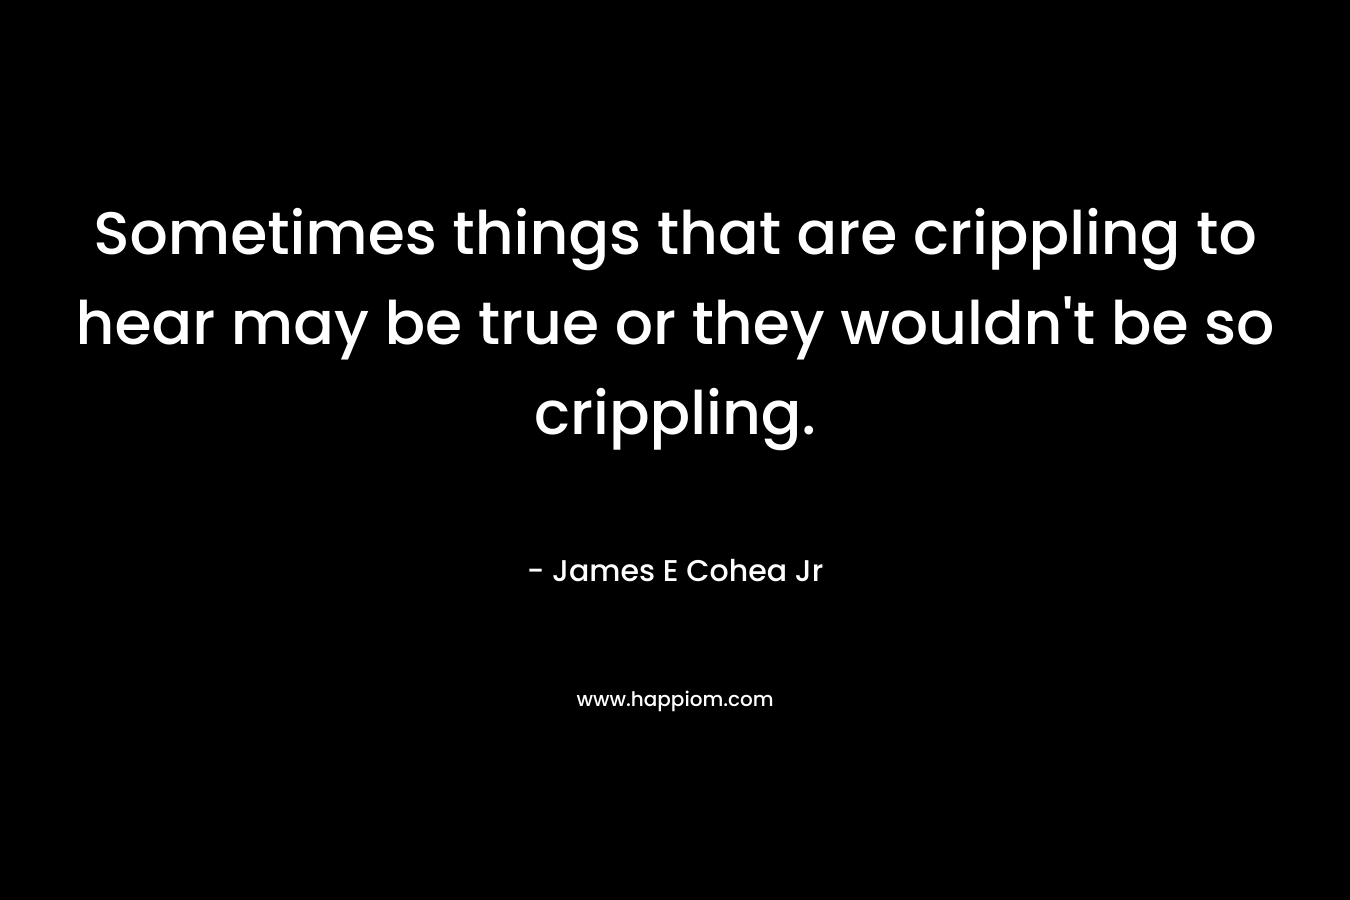 Sometimes things that are crippling to hear may be true or they wouldn't be so crippling.